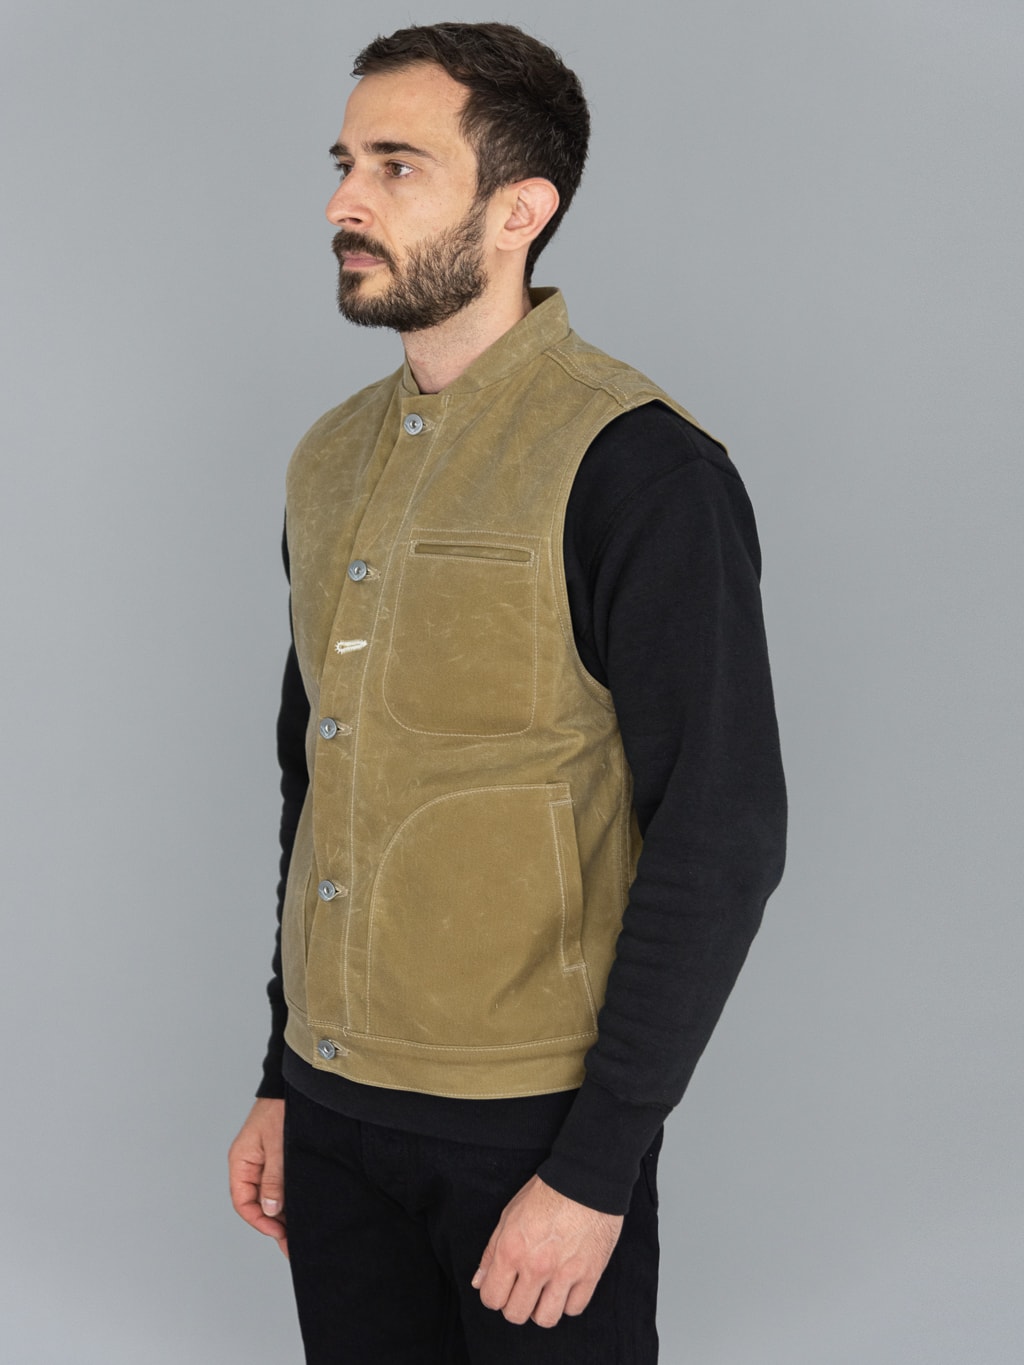 rogue territory lined waxed canvas supply vest 10oz tan side fit